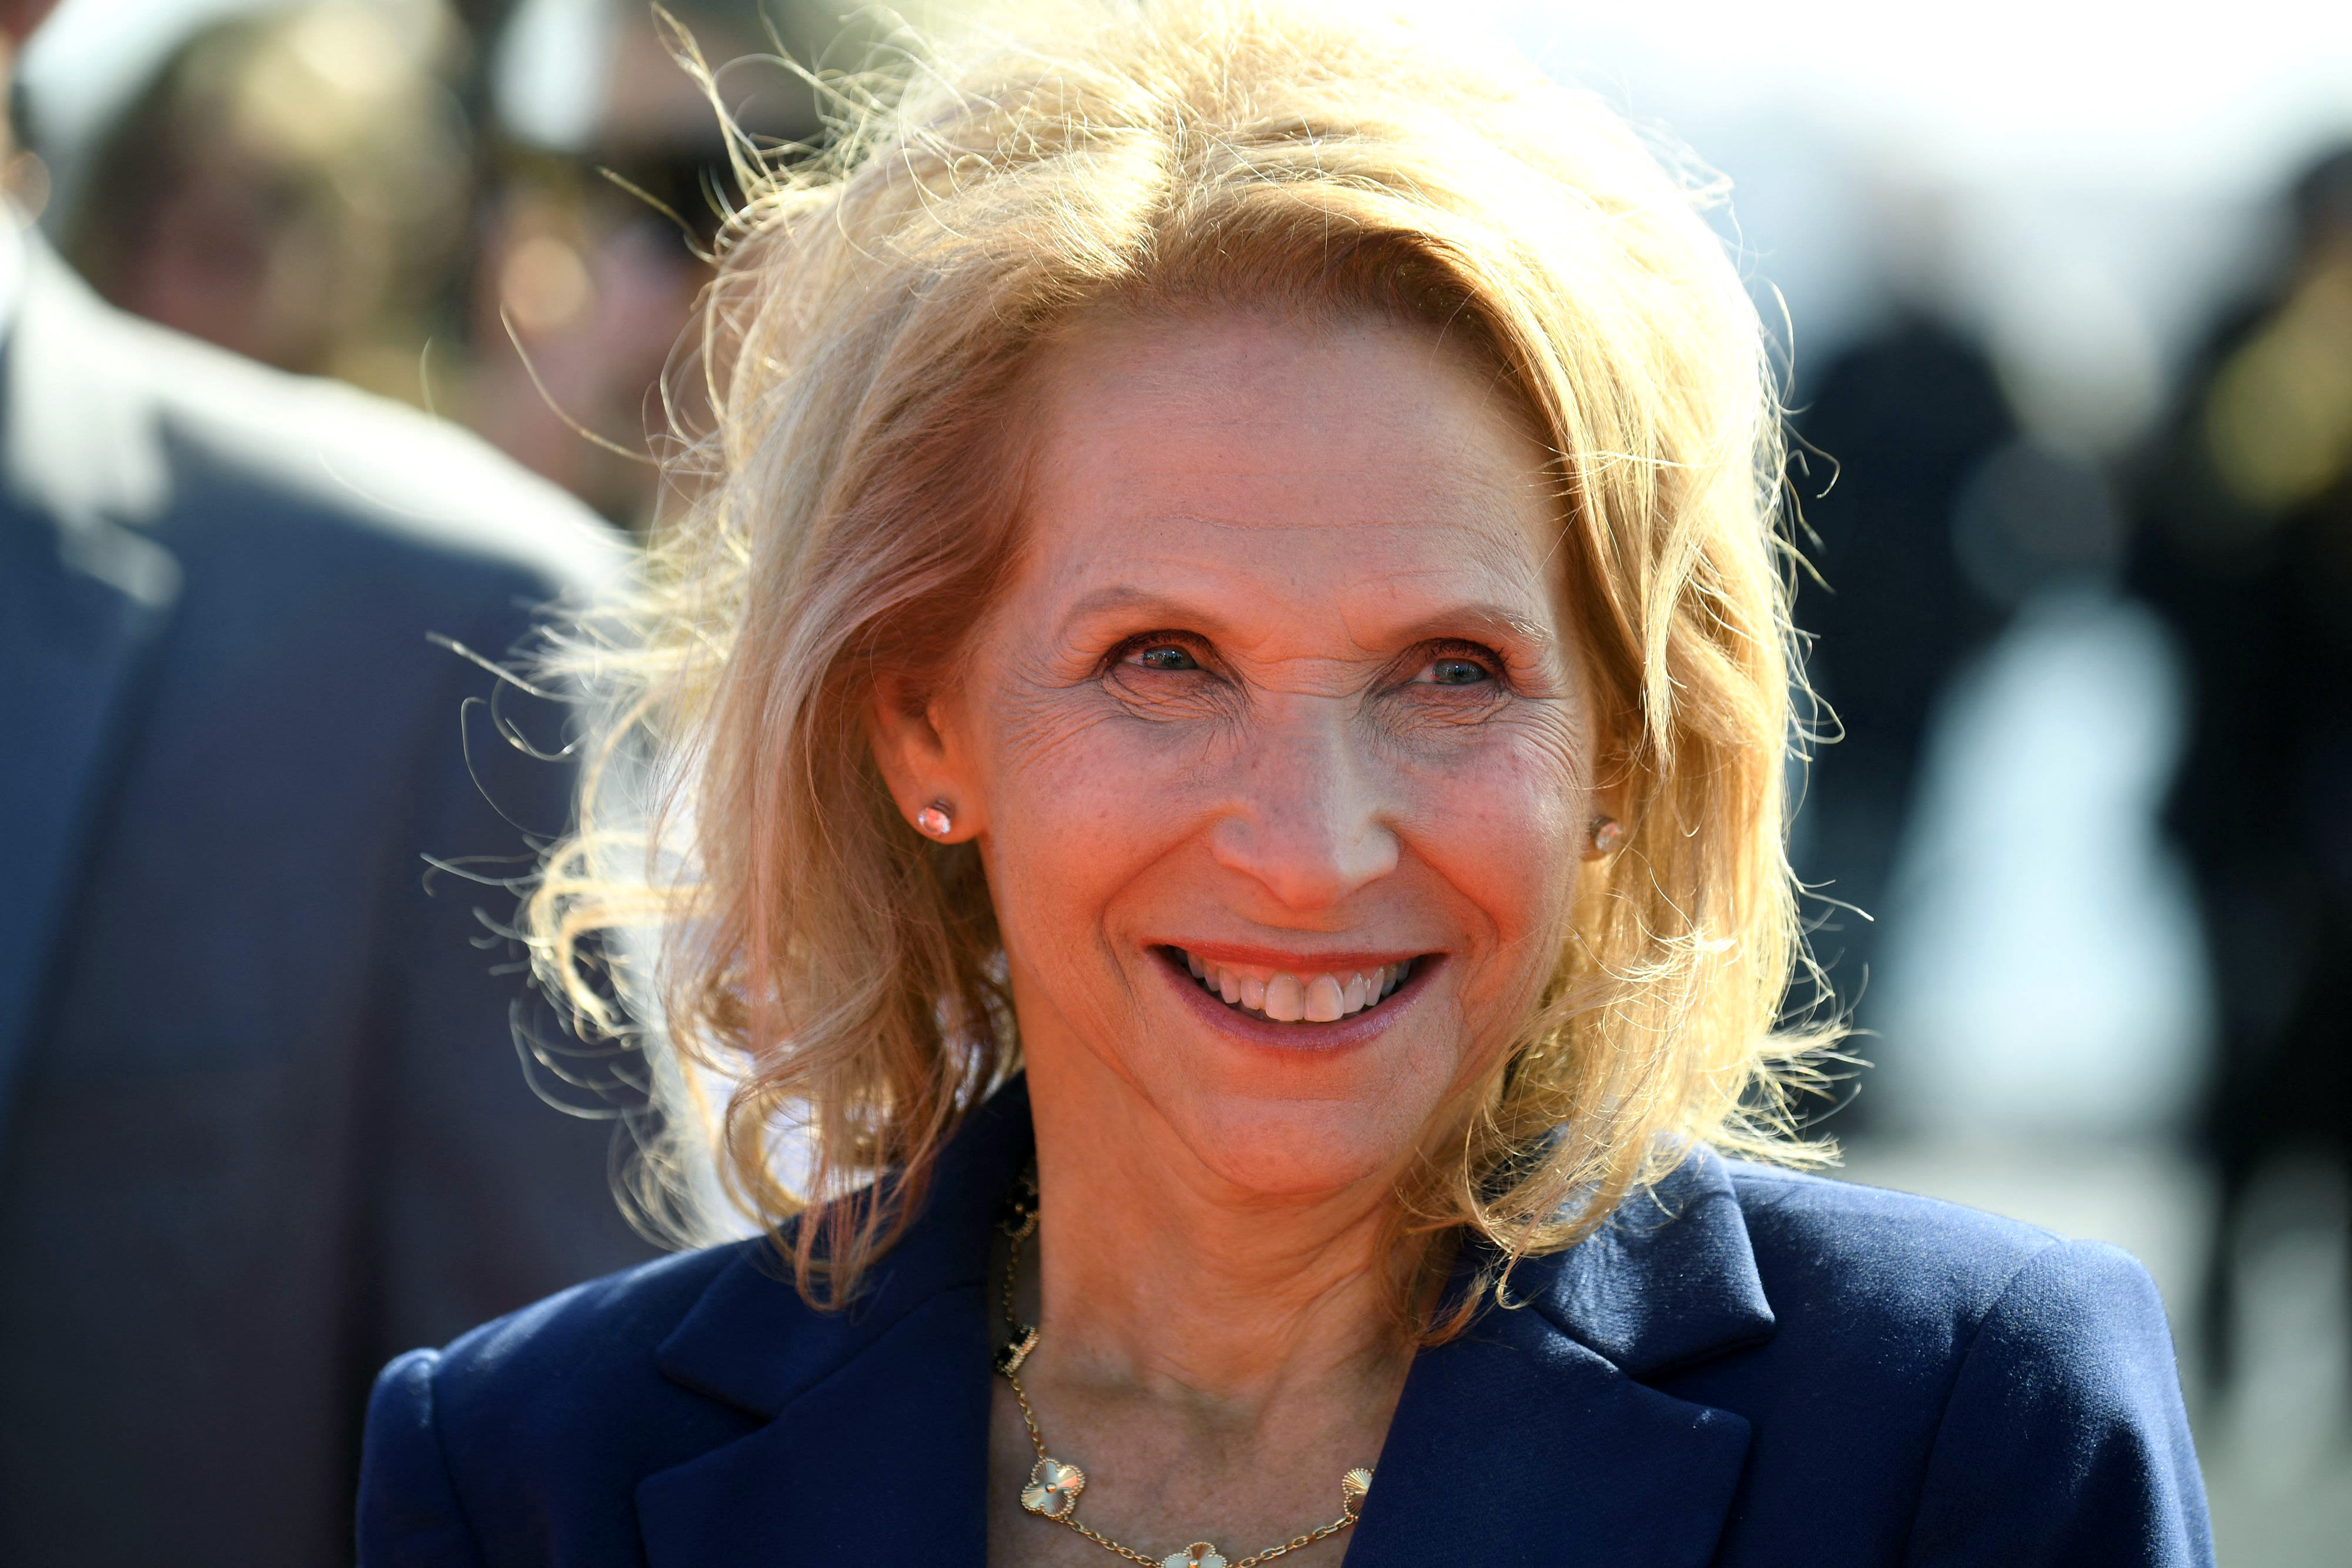 Shari Redstone was poised to make Paramount a Hollywood comeback story. What happened?